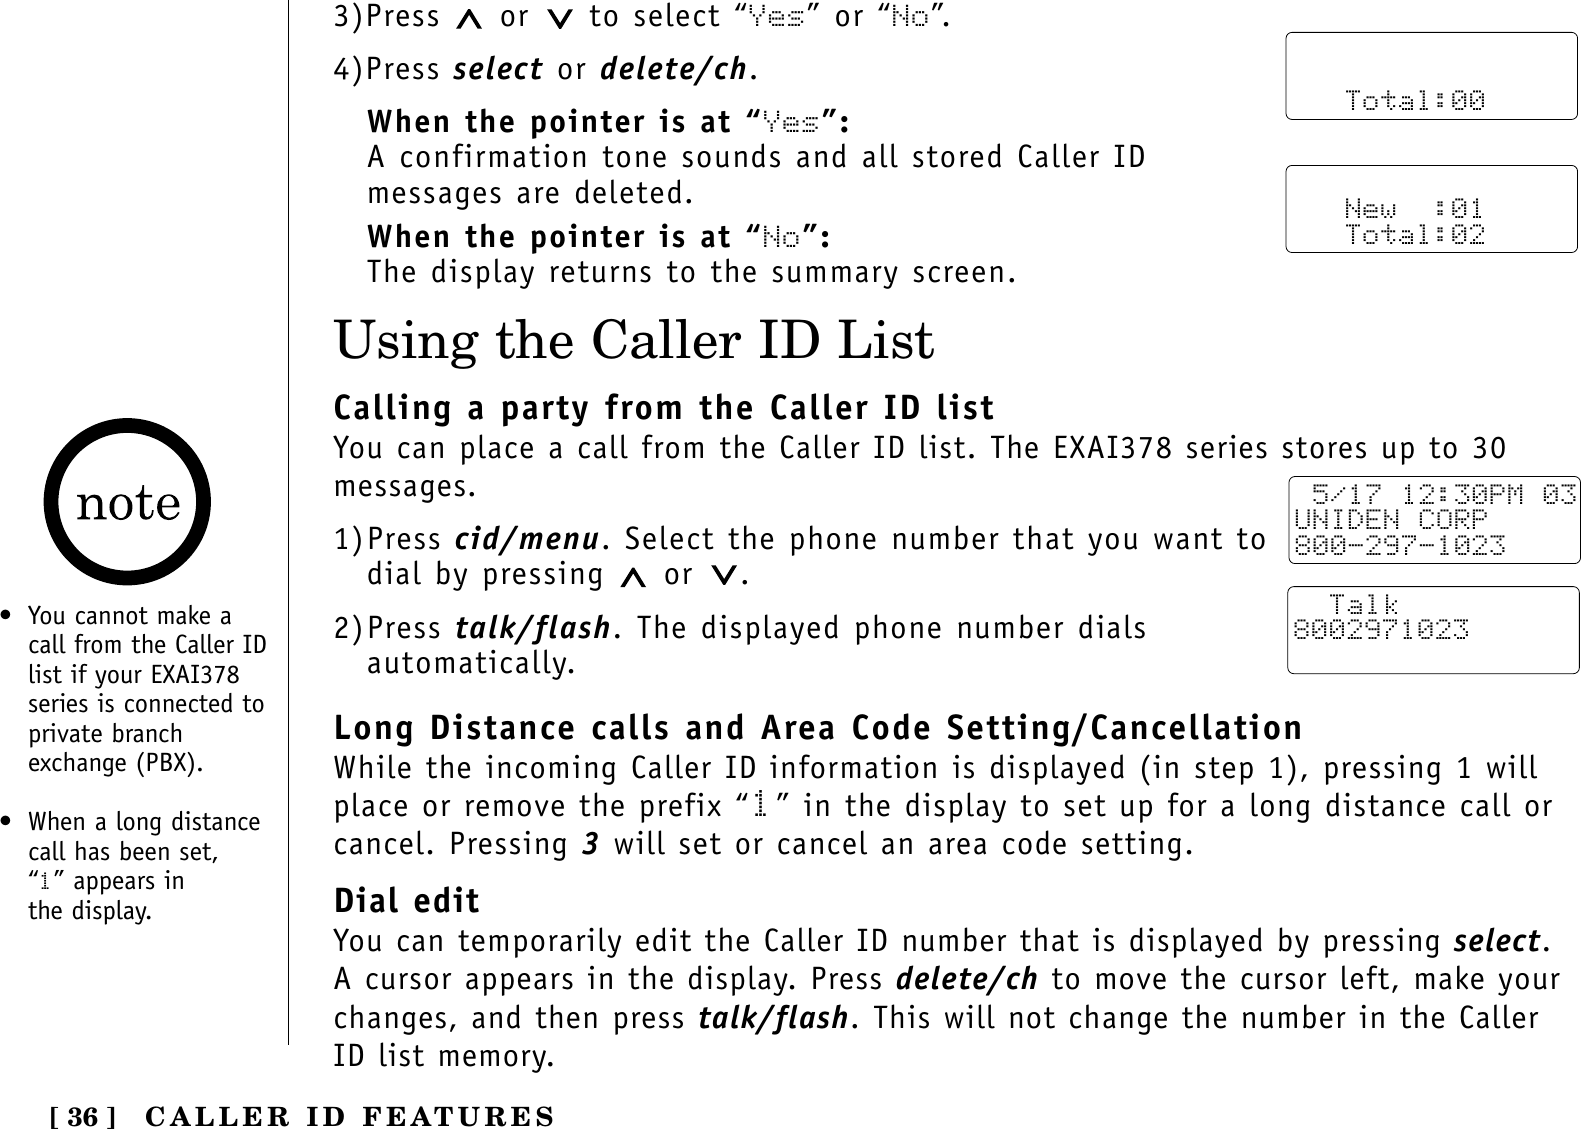 [ 36 ]Using the Caller ID List• You cannot make acall from the Caller IDlist if your EXAI378series is connected toprivate branchexchange (PBX).• When a long distancecall has been set, “1” appears in the display.3)Press  or to select “Yes” or “No”.4)Press select or delete/ch.When the pointer is at “Yes”:A confirmation tone sounds and all stored Caller IDmessages are deleted.When the pointer is at “No”:The display returns to the summary screen.      Total:00   New  :01   Total:02Calling a party from the Caller ID listYou can place a call from the Caller ID list. The EXAI378 series stores up to 30messages.1)Press cid/menu. Select the phone number that you want todial by pressing  or .2)Press talk/flash. The displayed phone number dialsautomatically.Long Distance calls and Area Code Setting/CancellationWhile the incoming Caller ID information is displayed (in step 1), pressing 1 willplace or remove the prefix “1” in the display to set up for a long distance call orcancel. Pressing 3will set or cancel an area code setting.Dial editYou can temporarily edit the Caller ID number that is displayed by pressing select.A cursor appears in the display. Press delete/ch to move the cursor left, make yourchanges, and then press talk/flash. This will not change the number in the CallerID list memory.  5/17 12:30PM 03UNIDEN CORP800-297-1023  Talk8002971023CALLER ID FEATURES